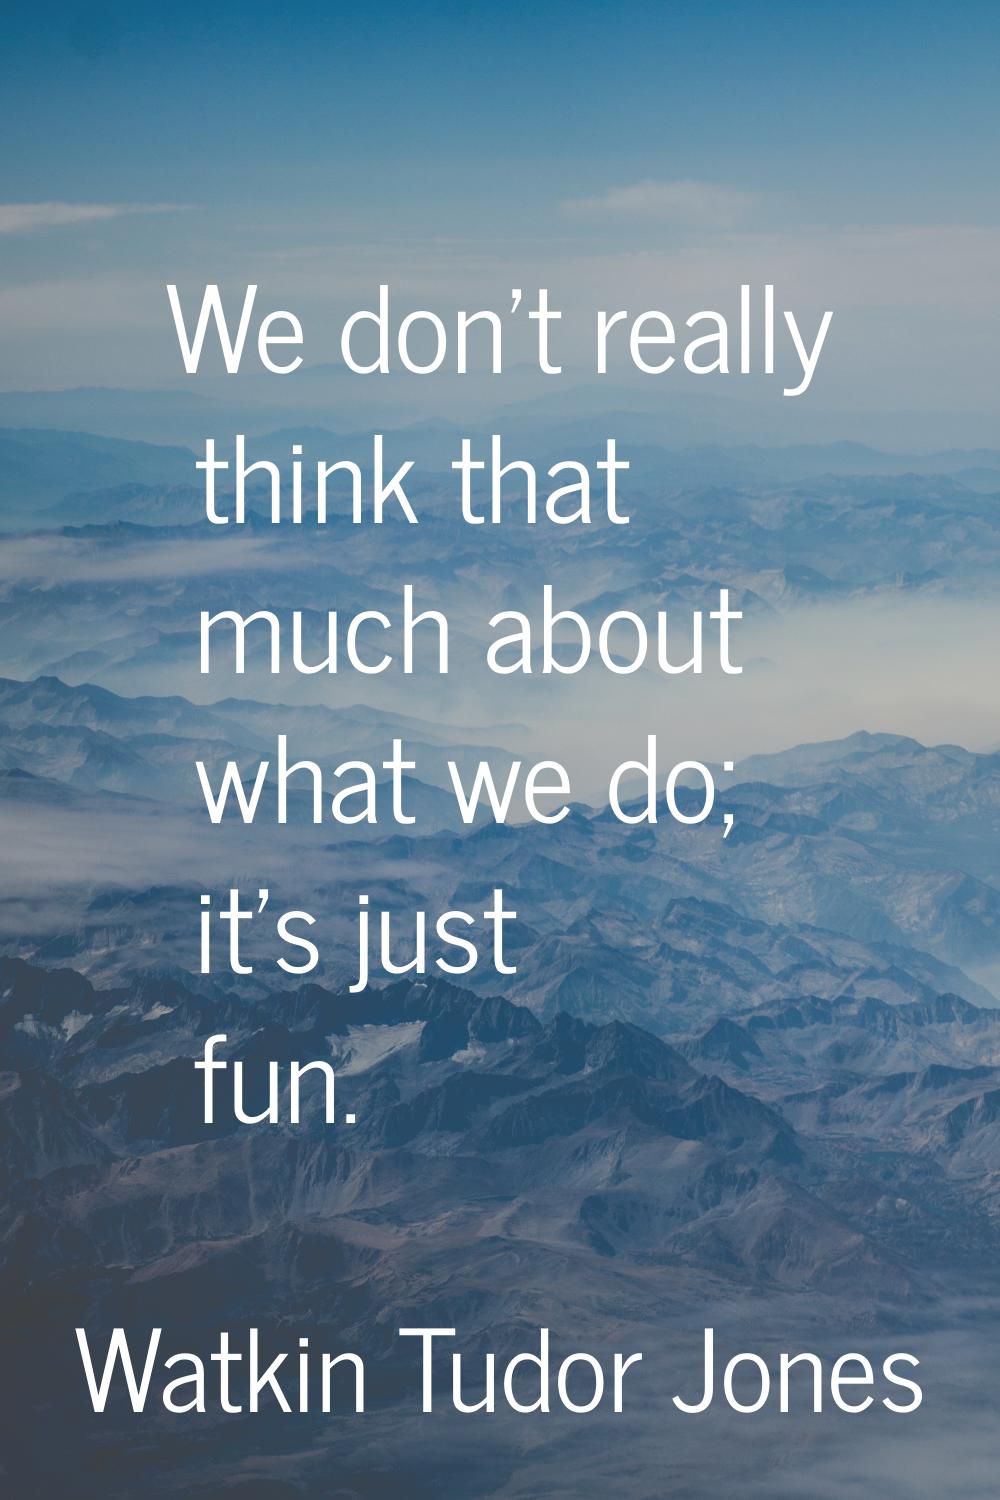 We don't really think that much about what we do; it's just fun.